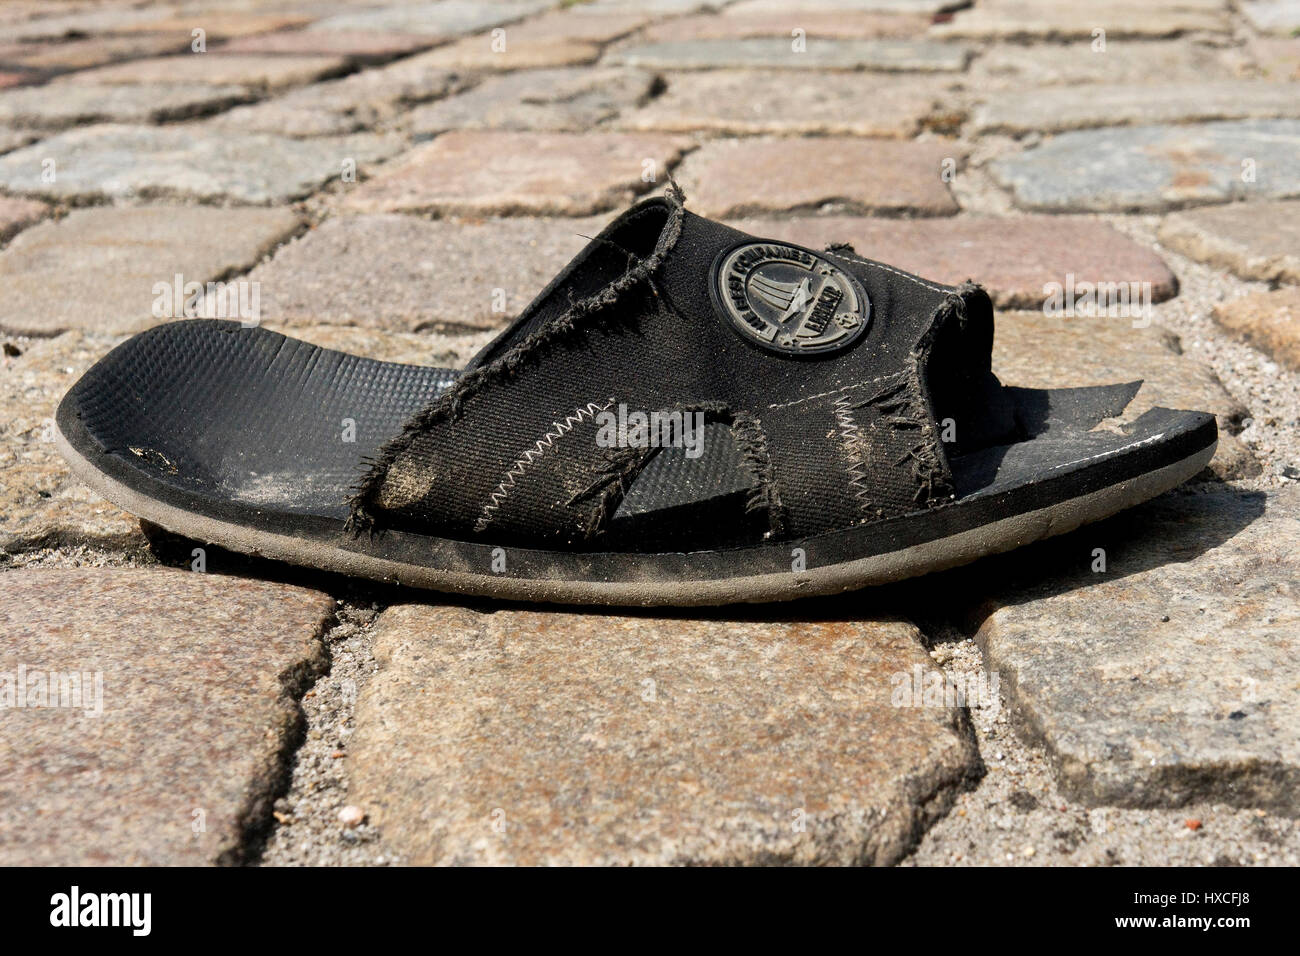 An old sandal lies on the street, In old sandal is on the road |, Eine alte Sandale liegt auf der Strasse |An old sandal is on the road| Stock Photo